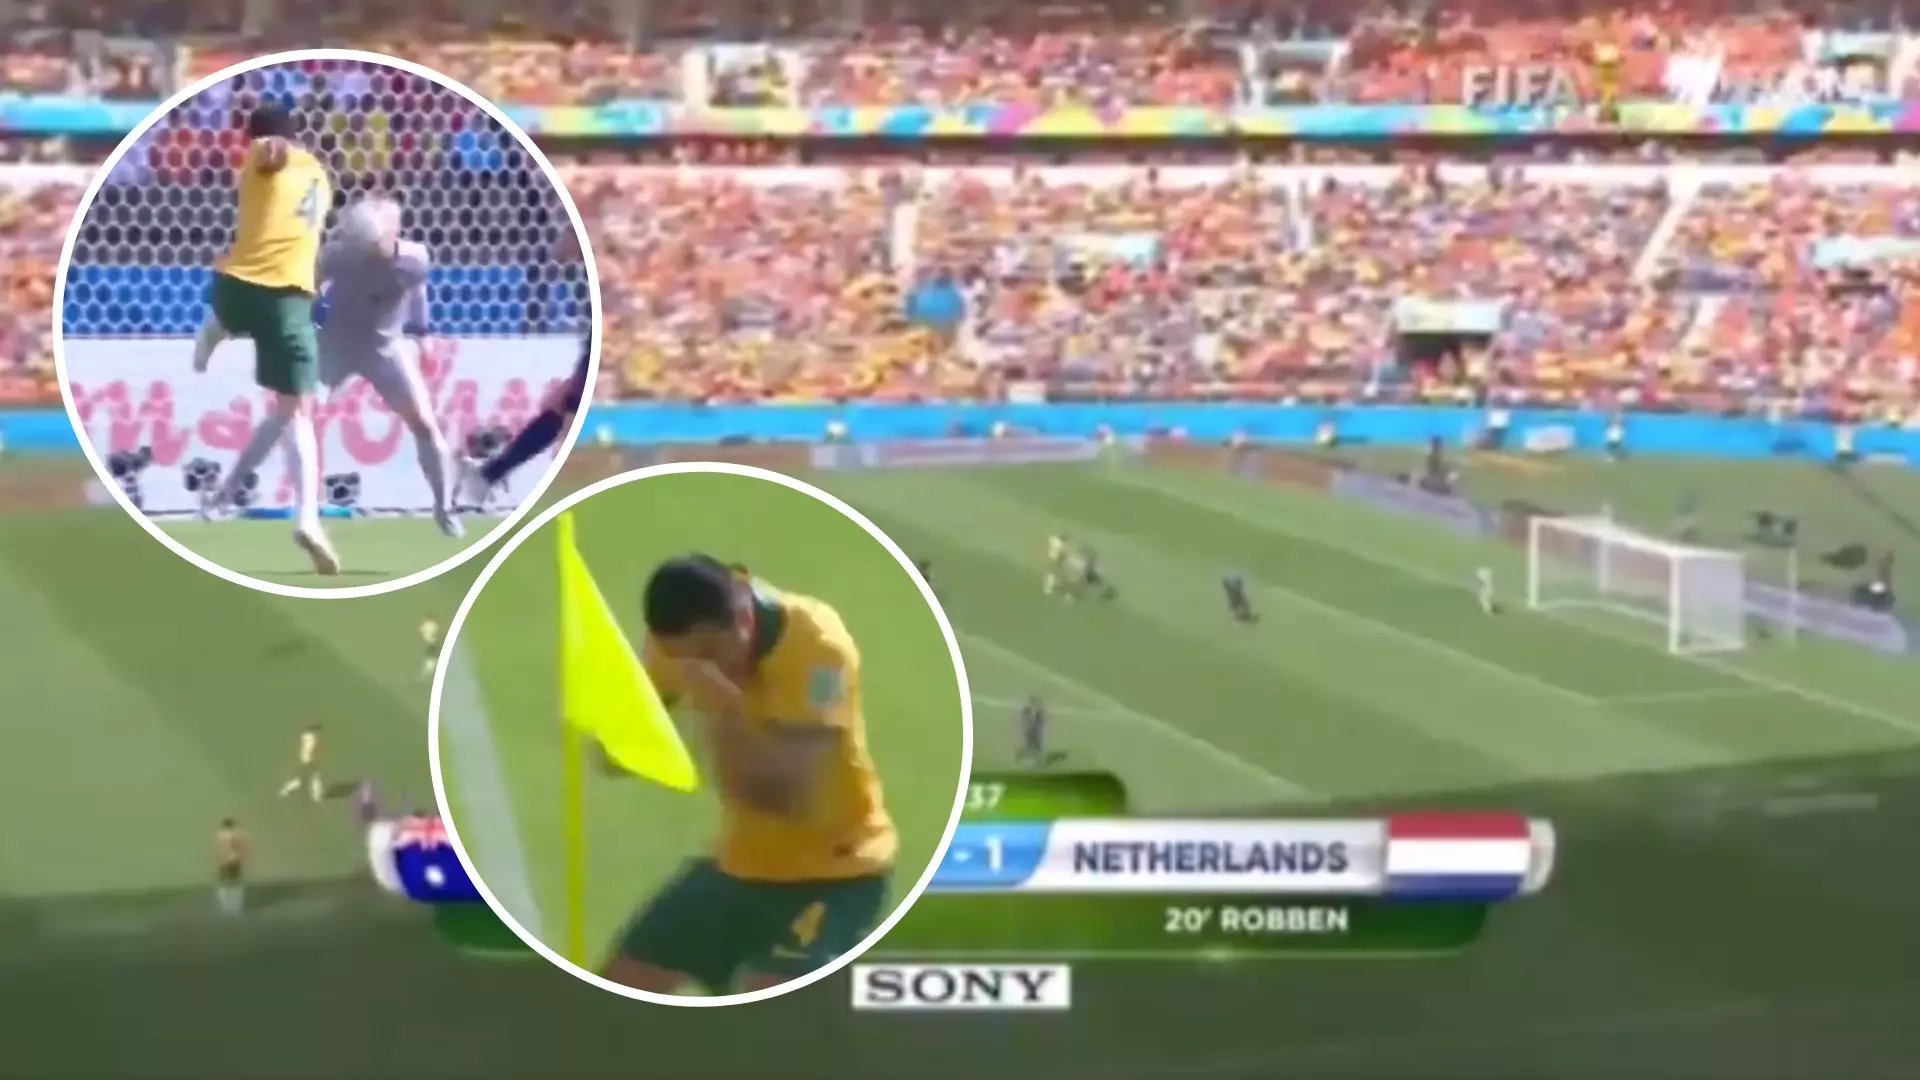 Five Years Ago Today, Tim Cahill Scored One Of The Best Goals In World Cup History